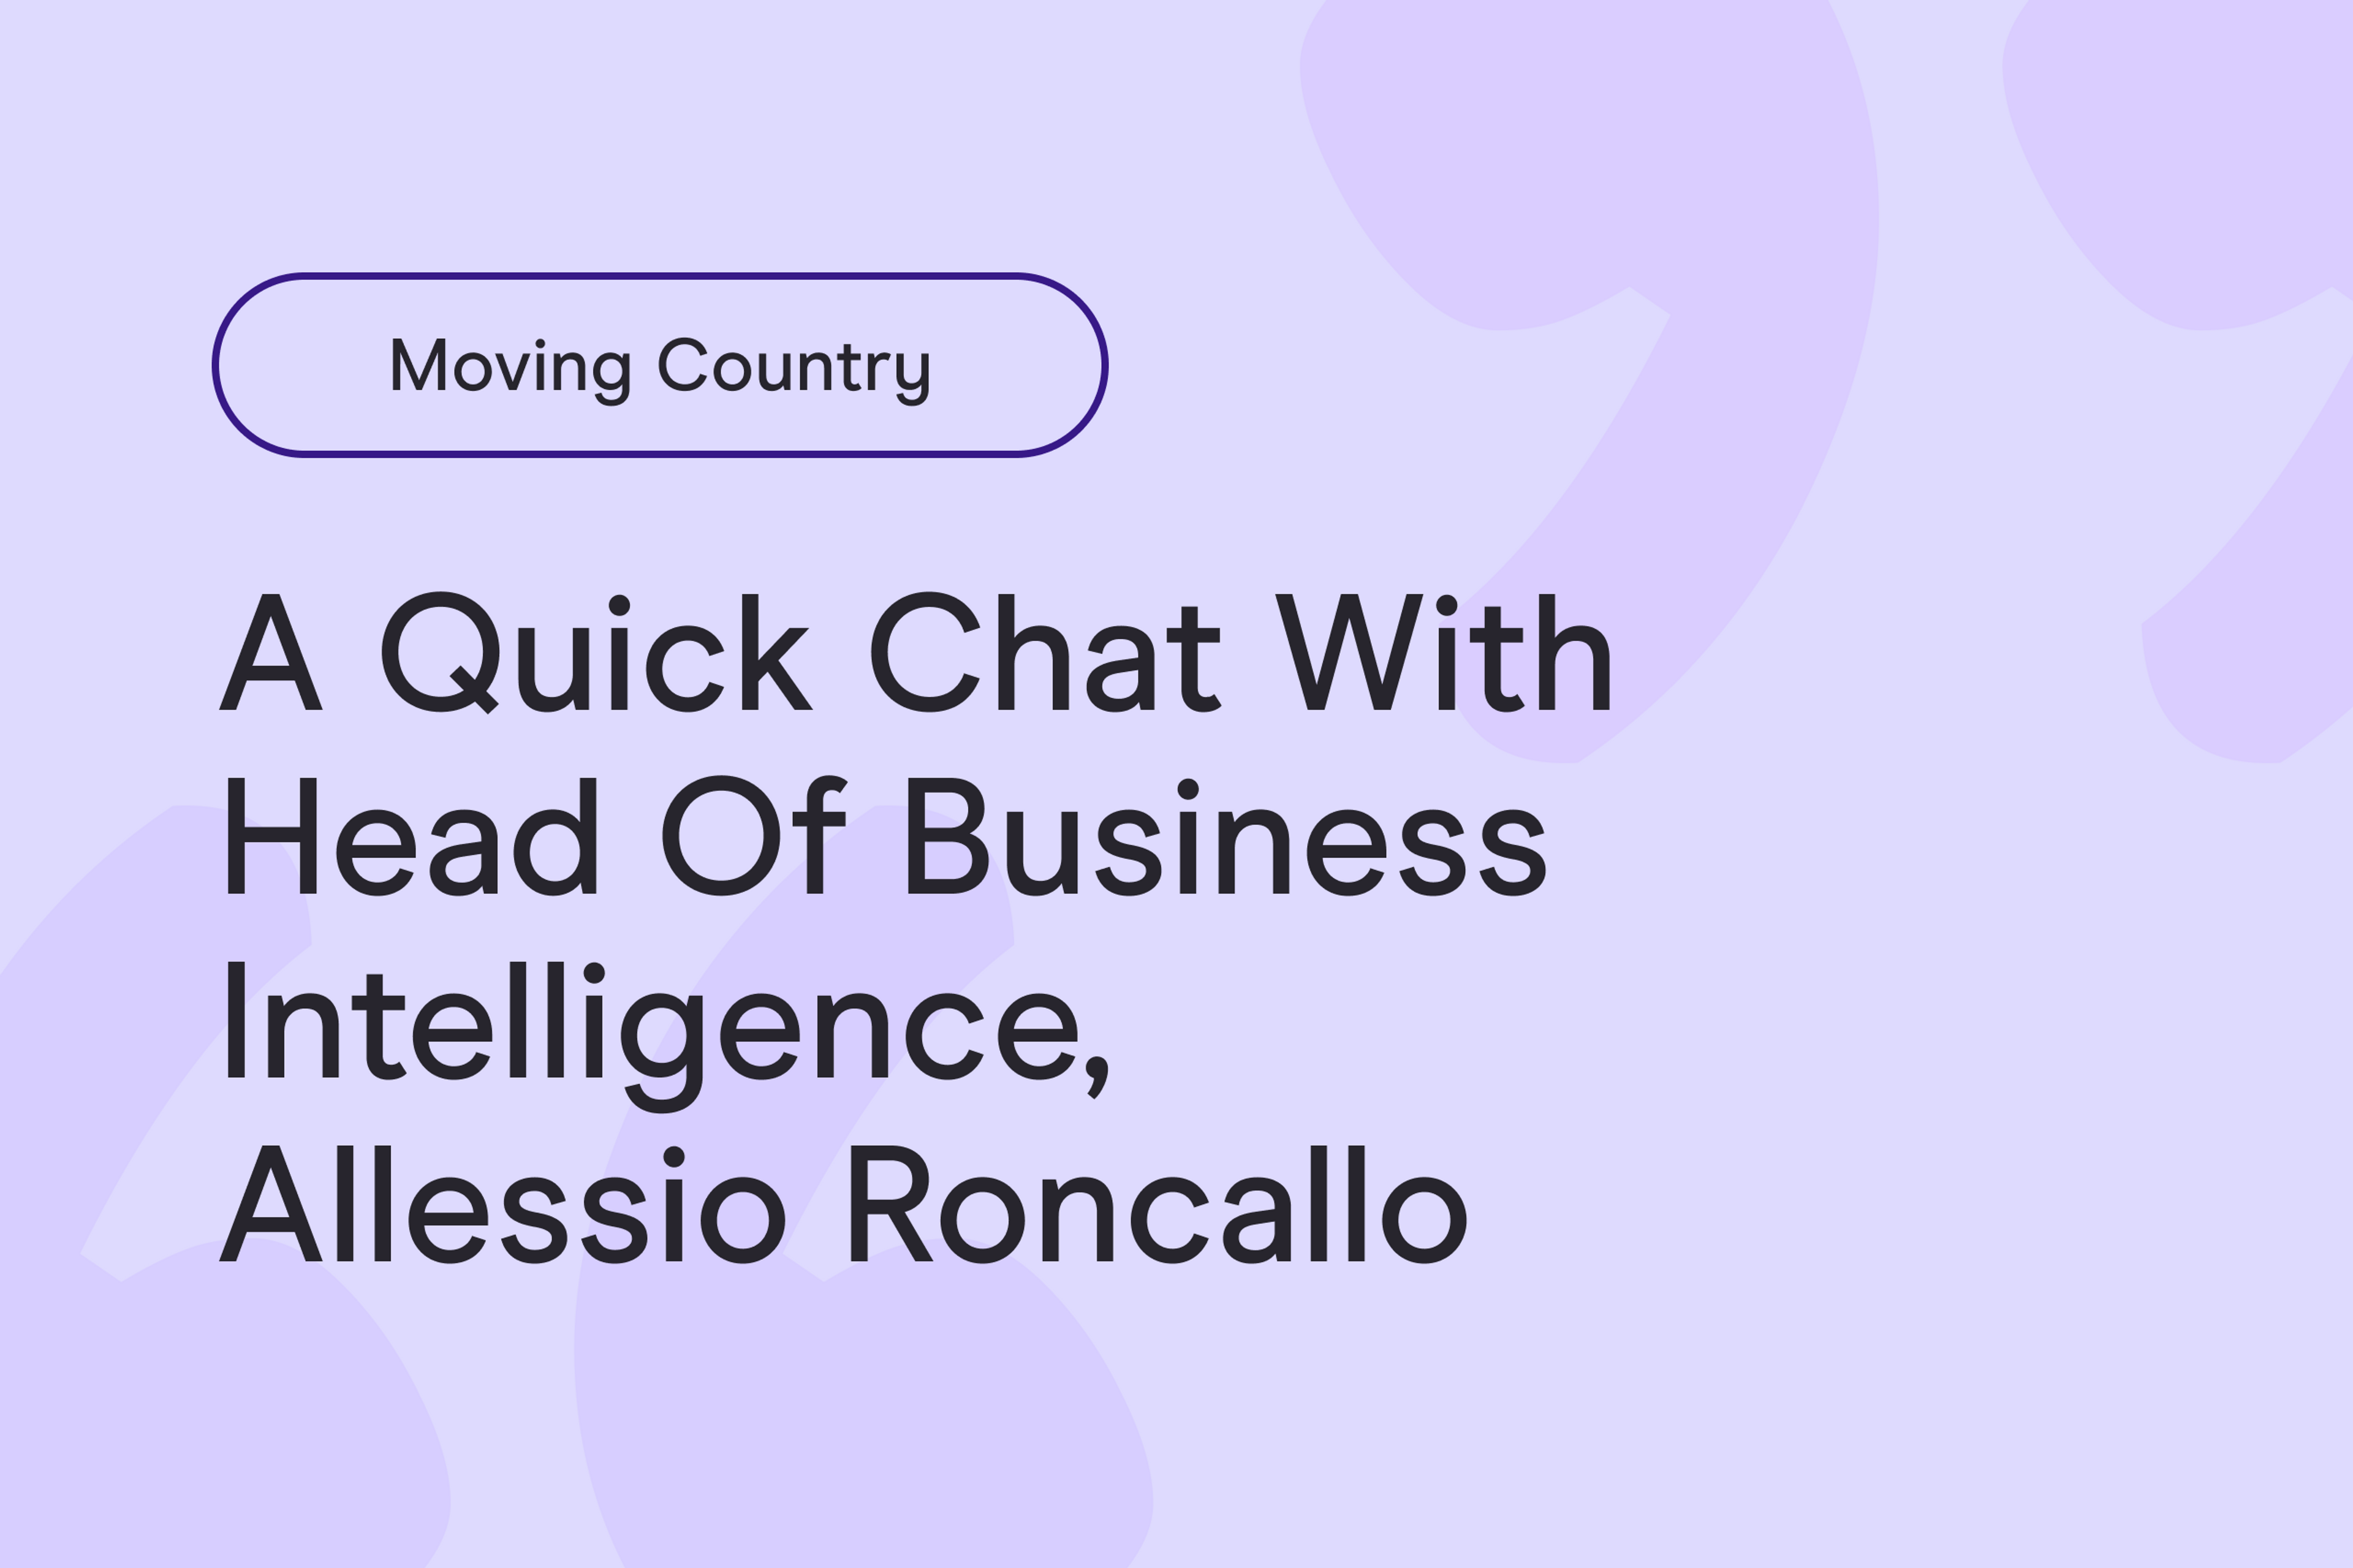 Moving Country: a quick conversation with Head of Business Intelligence, Alessio Roncallo